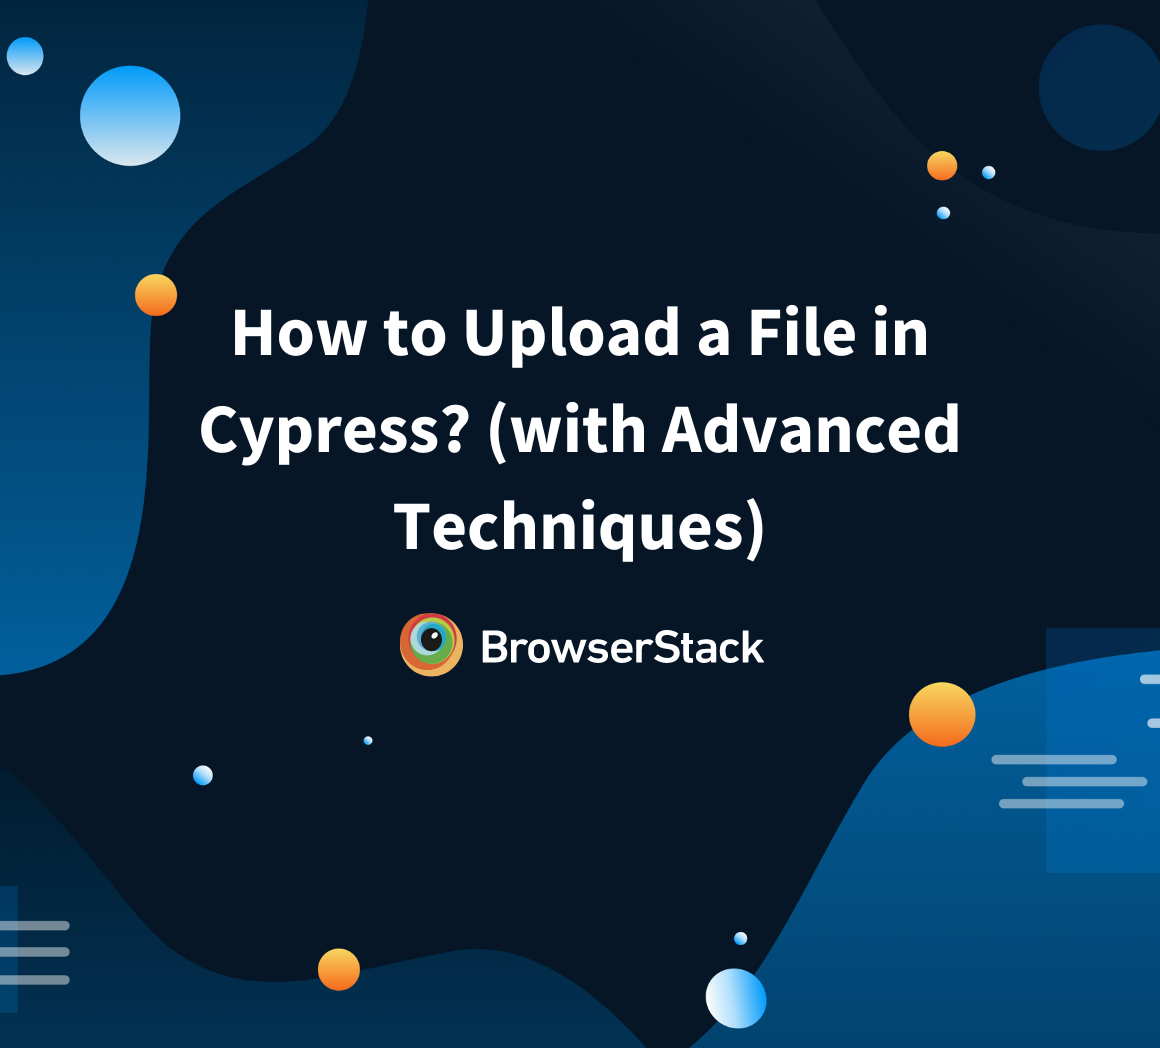 How to Upload a File in Cypress (with Advanced Techniques)